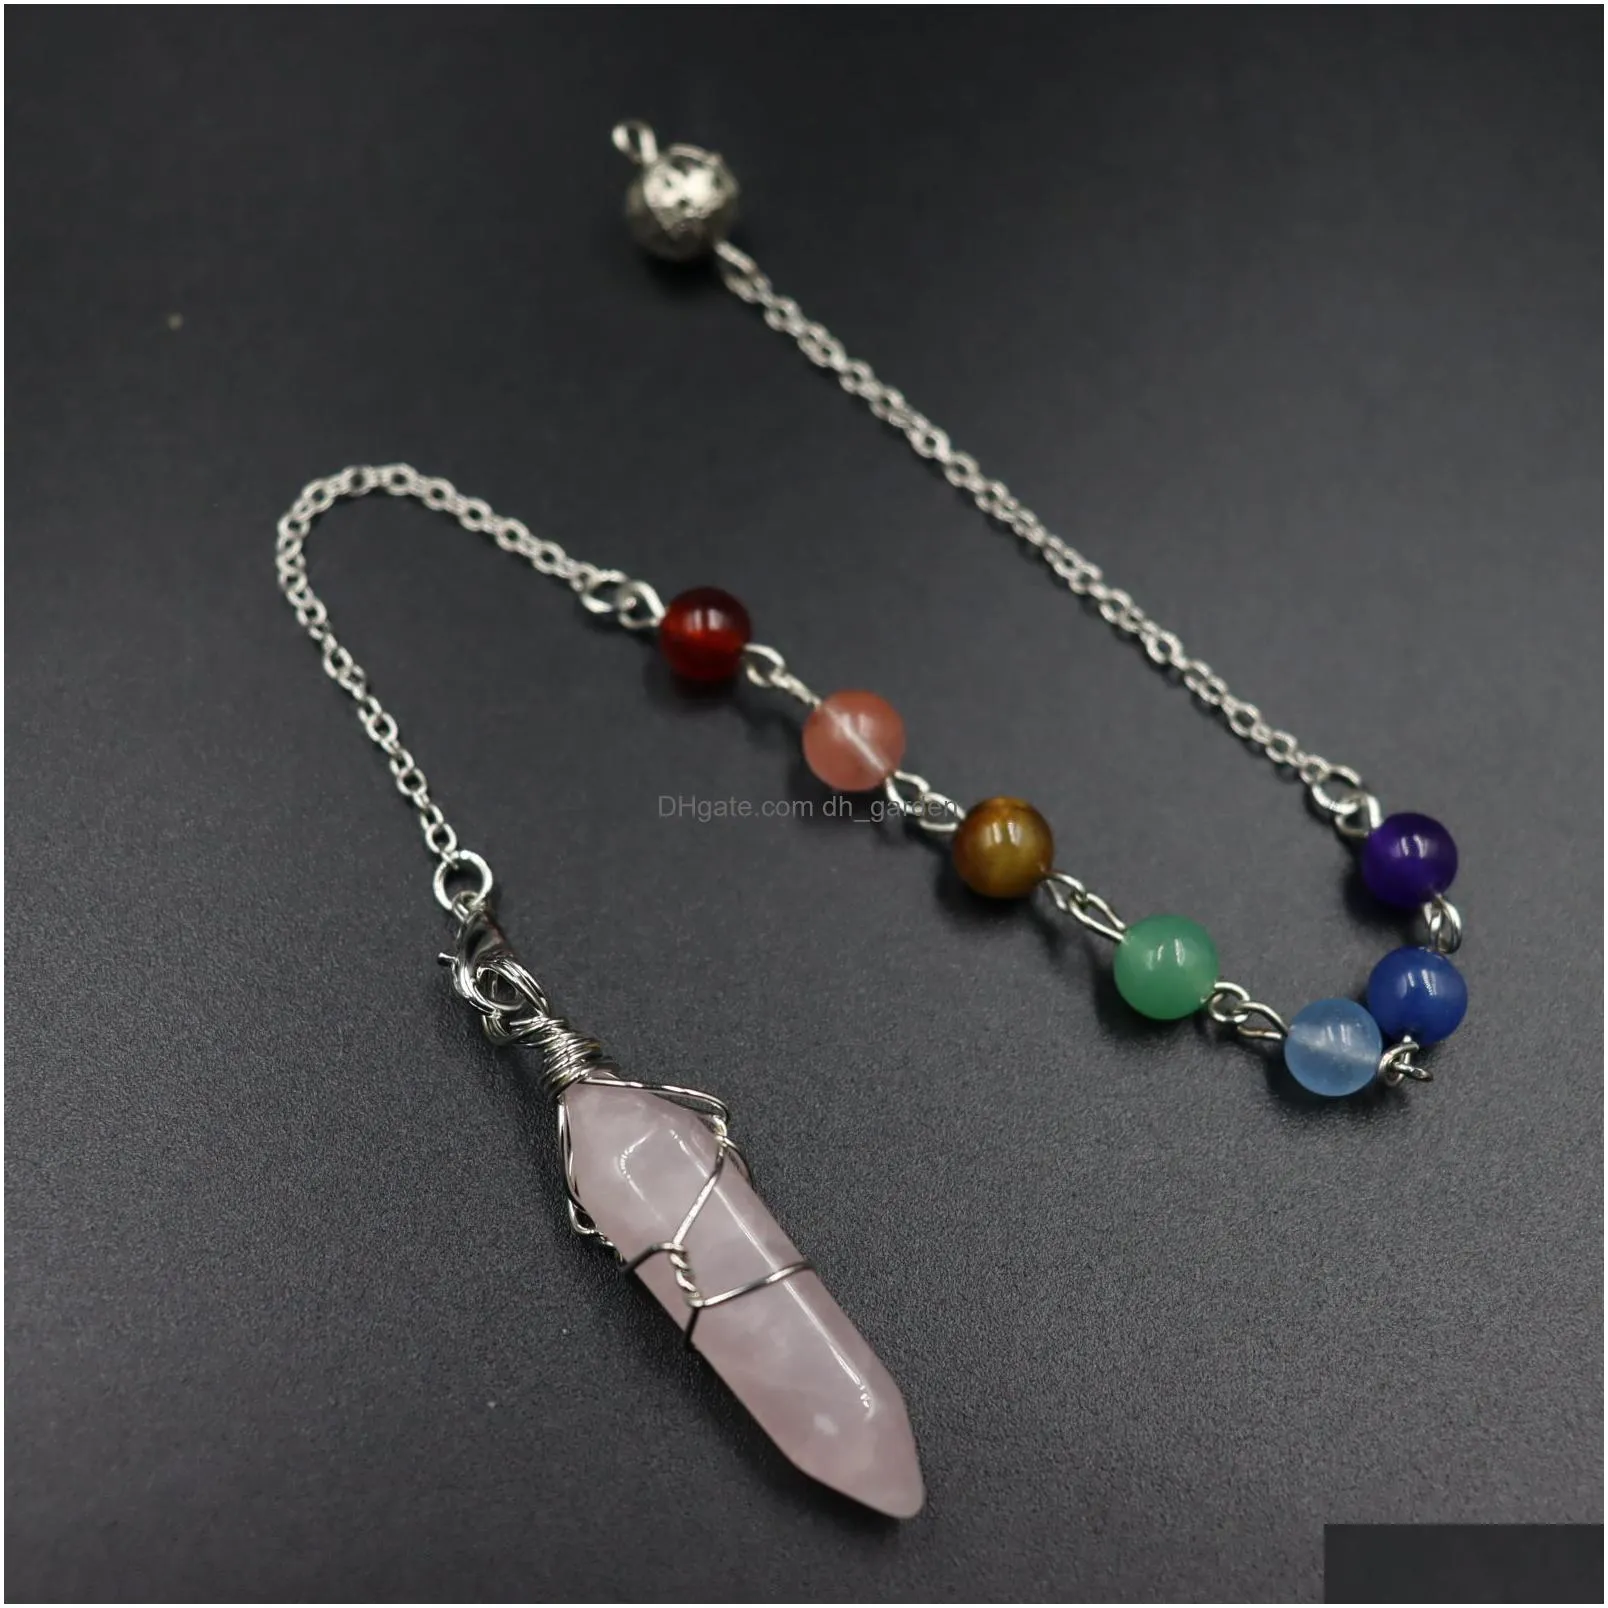 natural stone pendulum charms wire wrap hexagonal prism pendant 7 color chain for divination crystal jewelry charm amulet healing